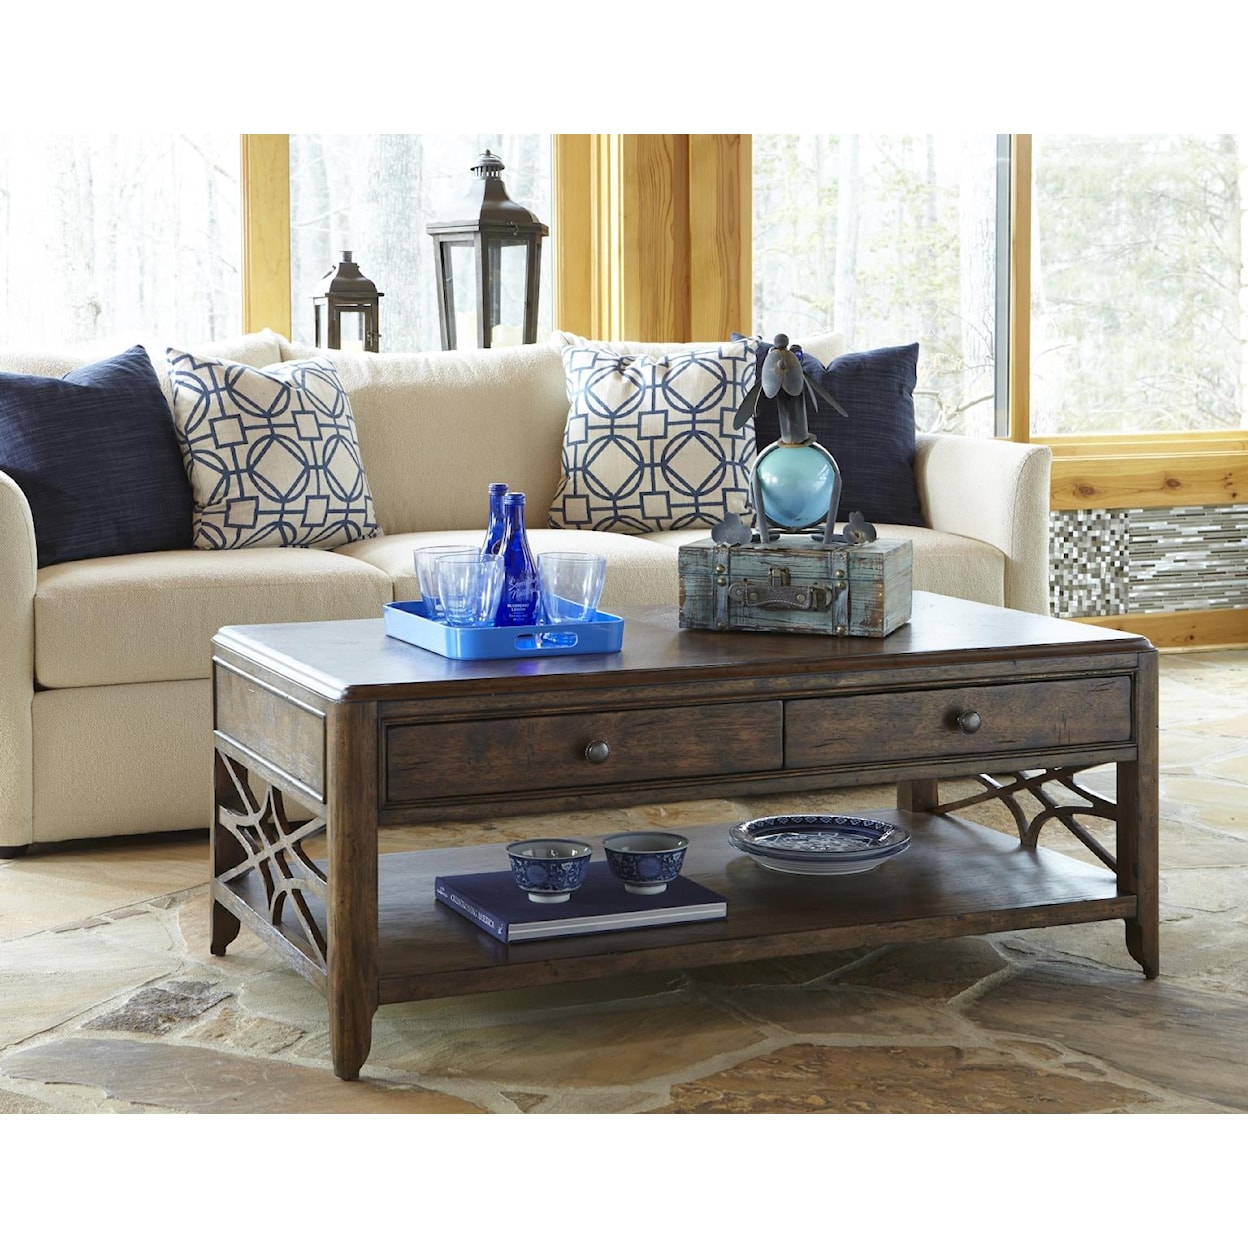 Trisha Yearwood Home Collection by Legacy Classic Trisha Yearwood Home Cocktail Table